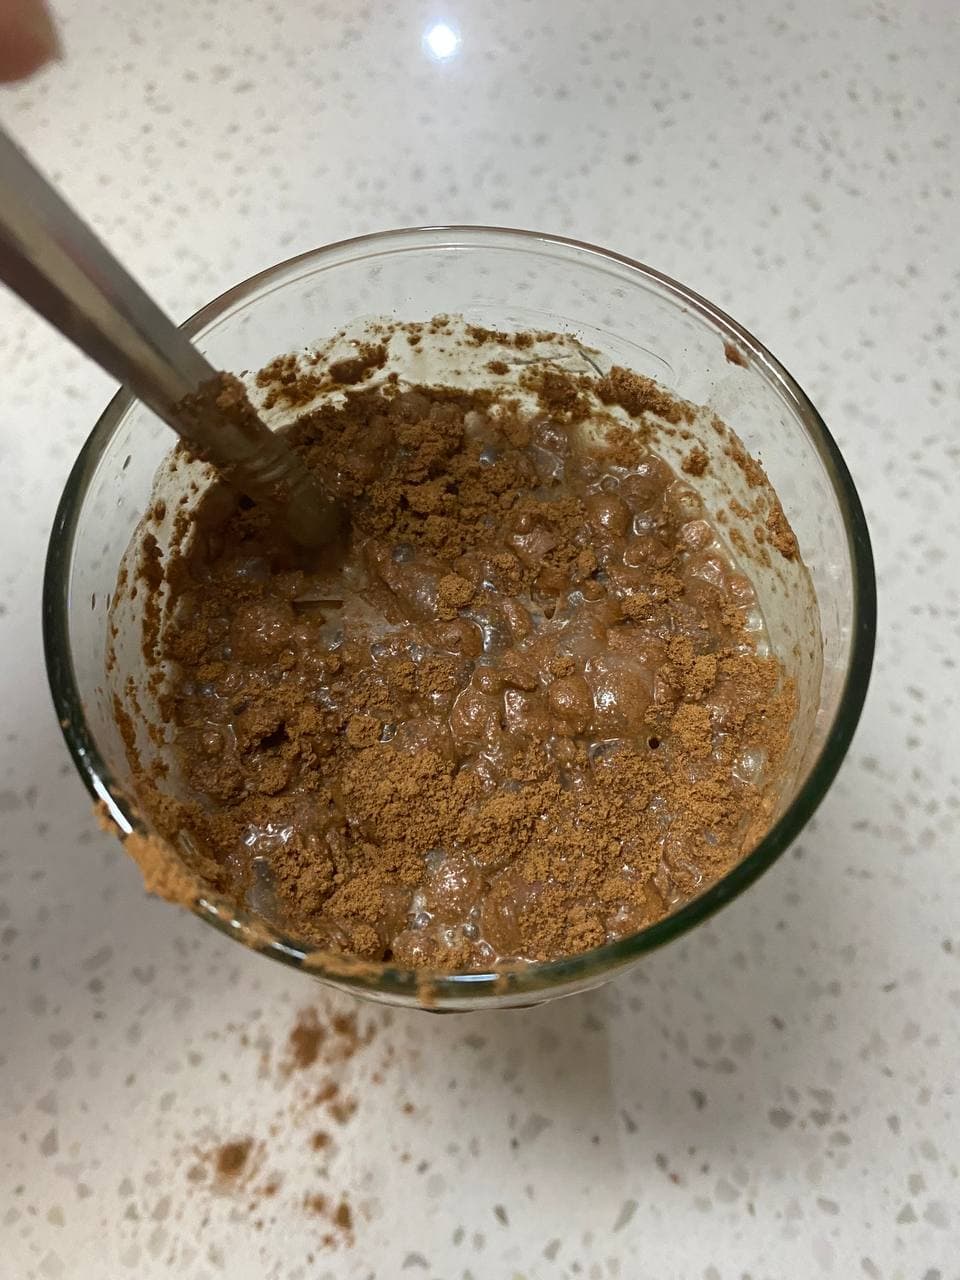 We tried the viral Coca-Cola & Milo powder recipe that's supposed to ...